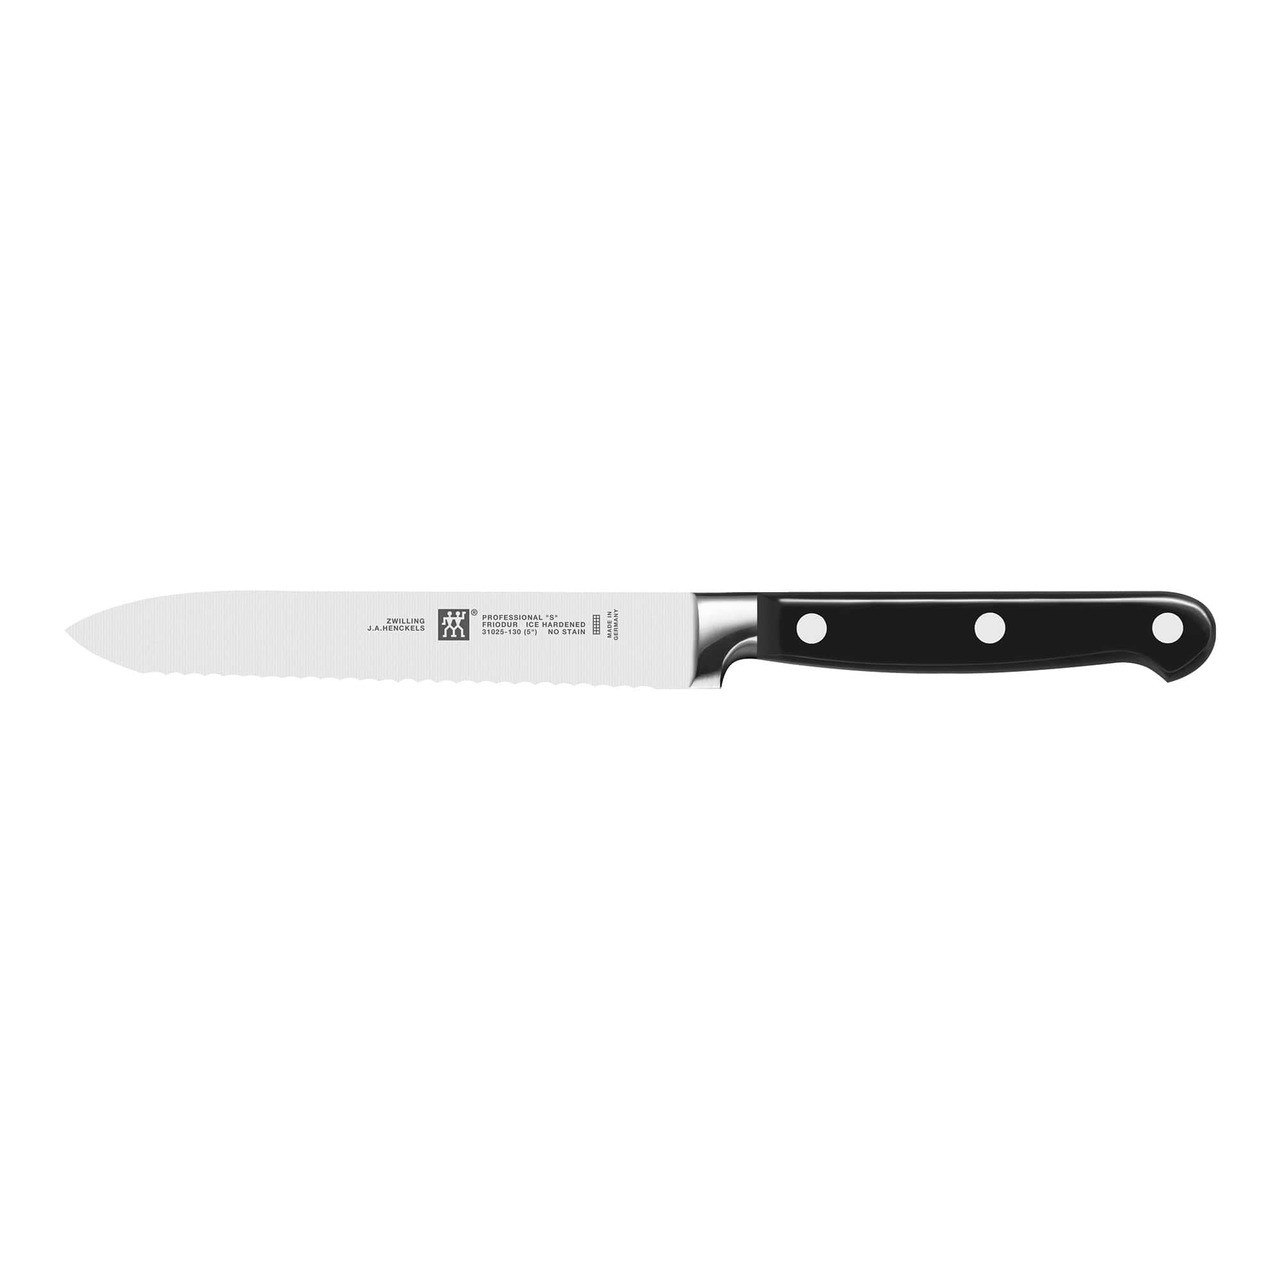 https://cdn11.bigcommerce.com/s-hccytny0od/images/stencil/1280x1280/products/617/714/zwilling-ja-henckels-professional-s-serrated-utility-knife__64626.1509663992.jpg?c=2?imbypass=on